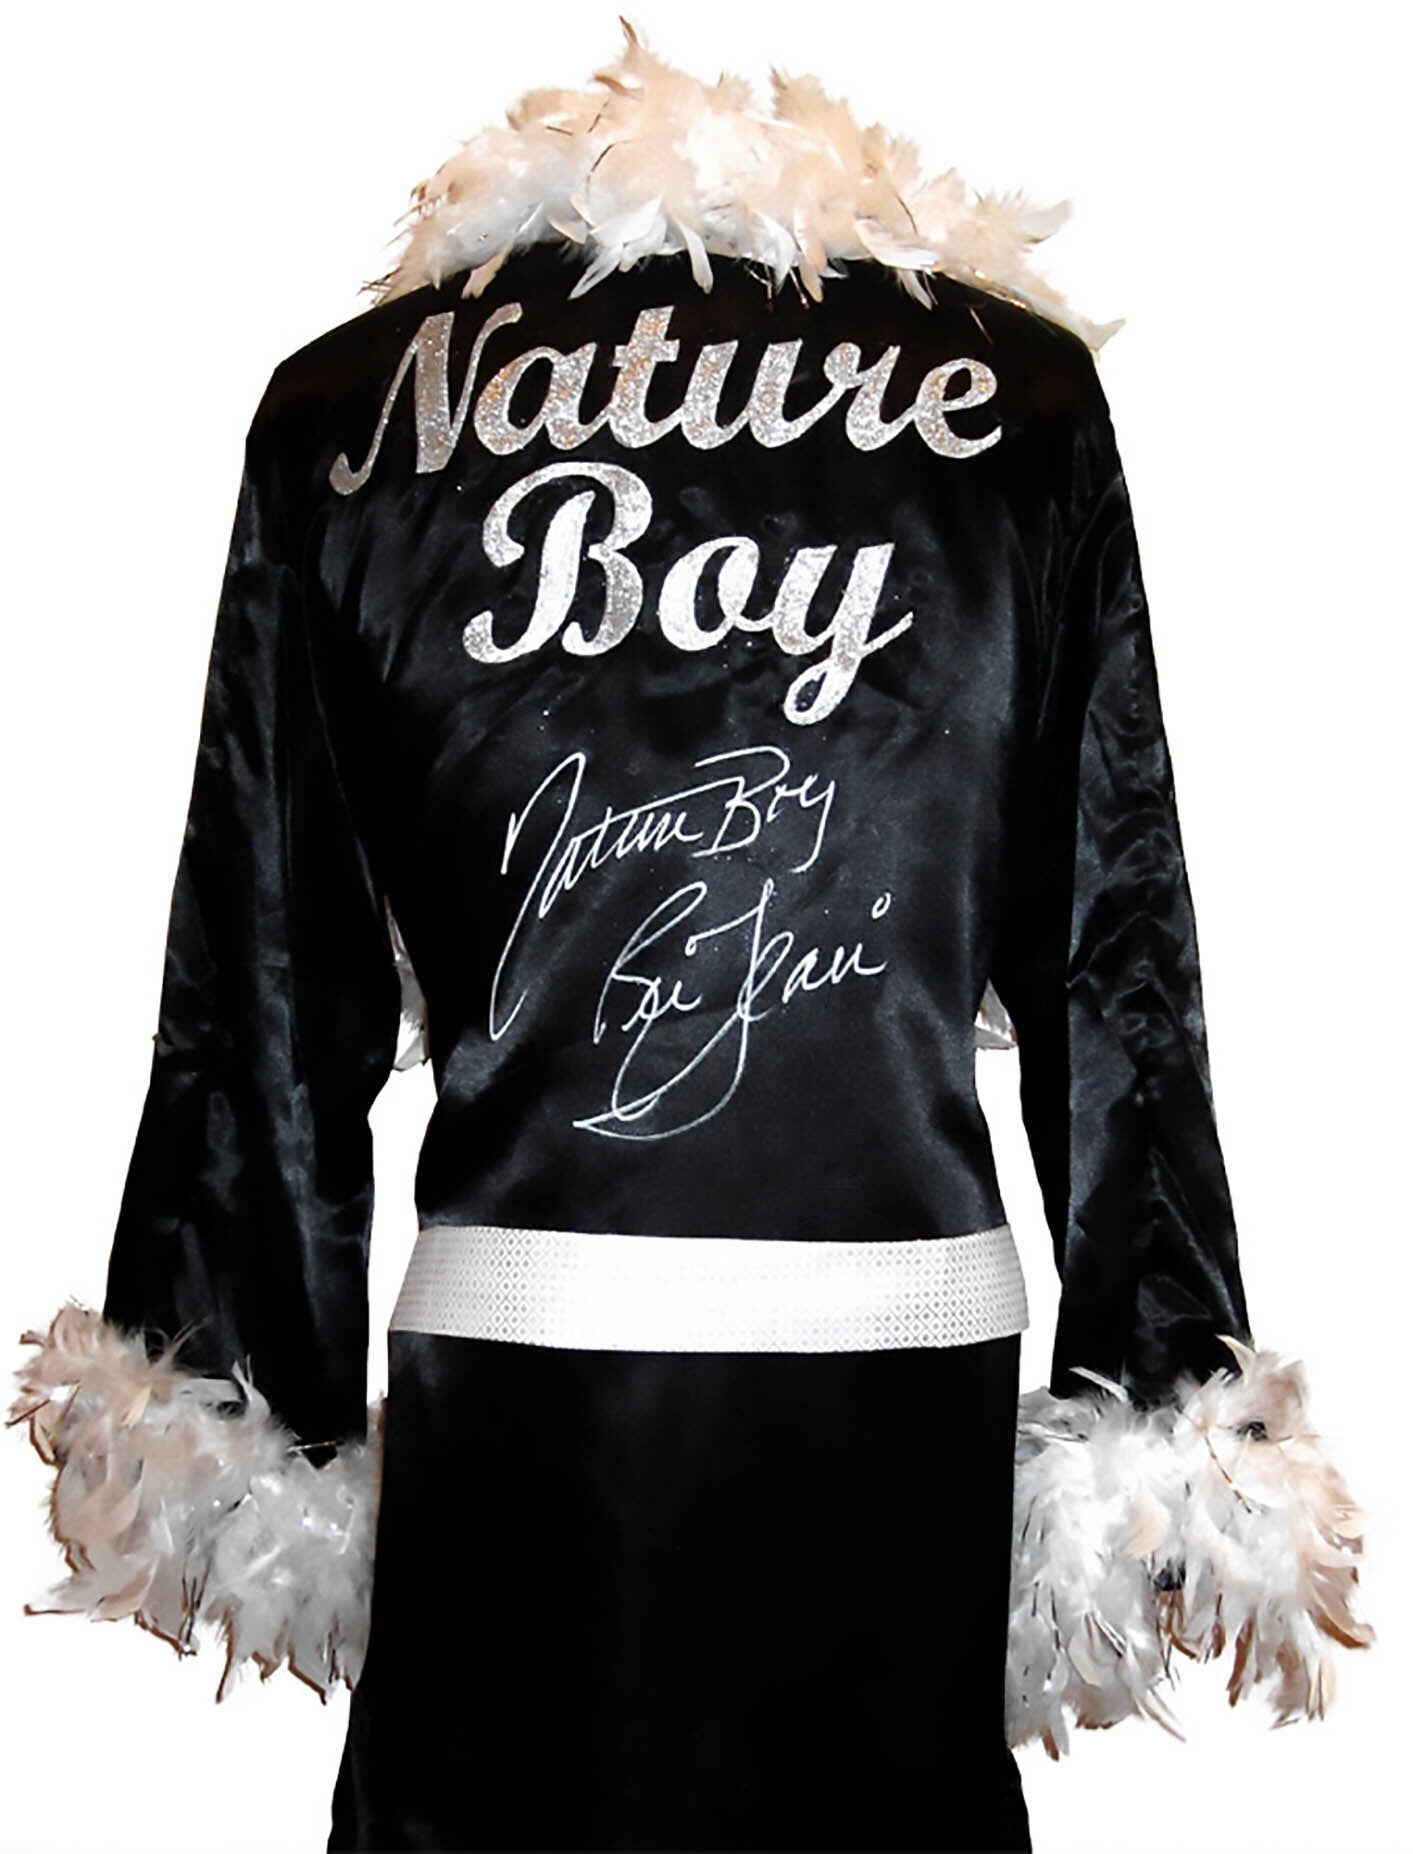 Ric Flair Autographed Black Wrestling Robe